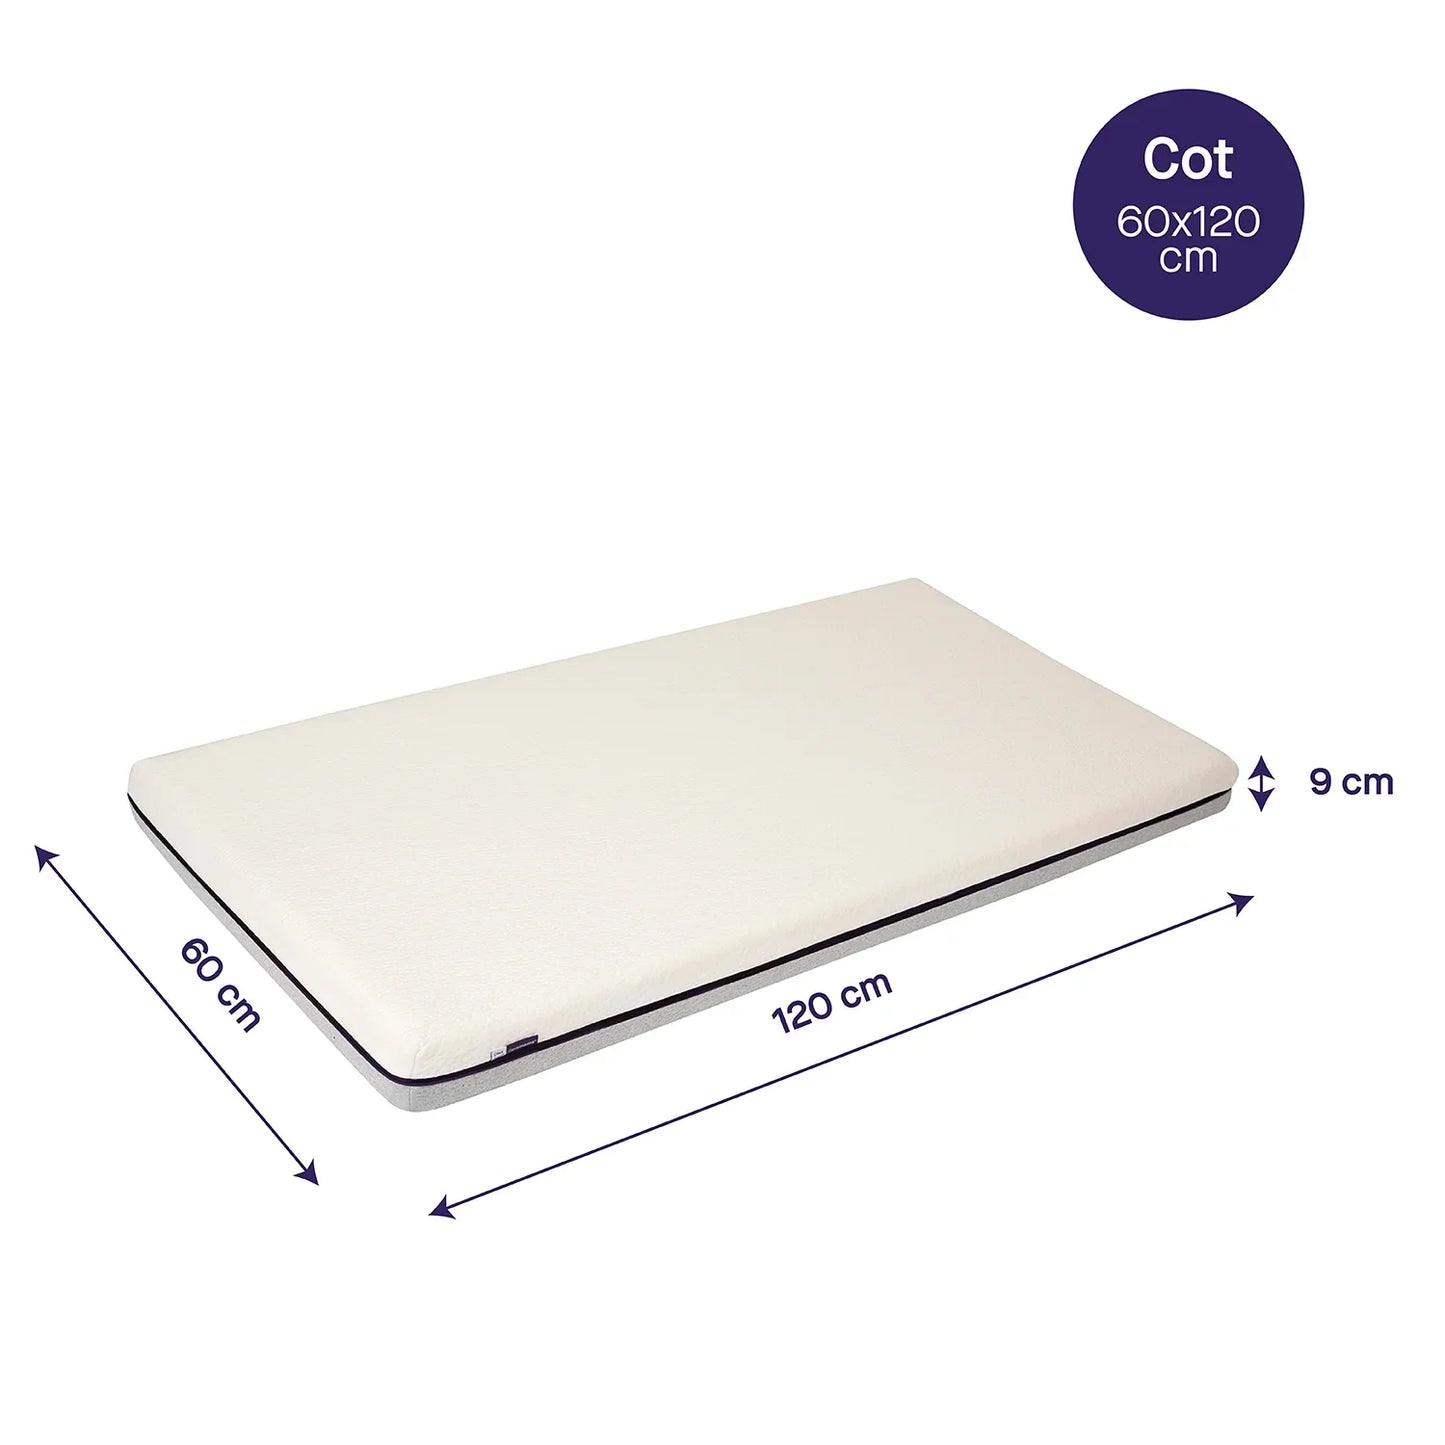 Clevamama Baby & Toddler Support Mattress Cotbed (70 x 140cm)